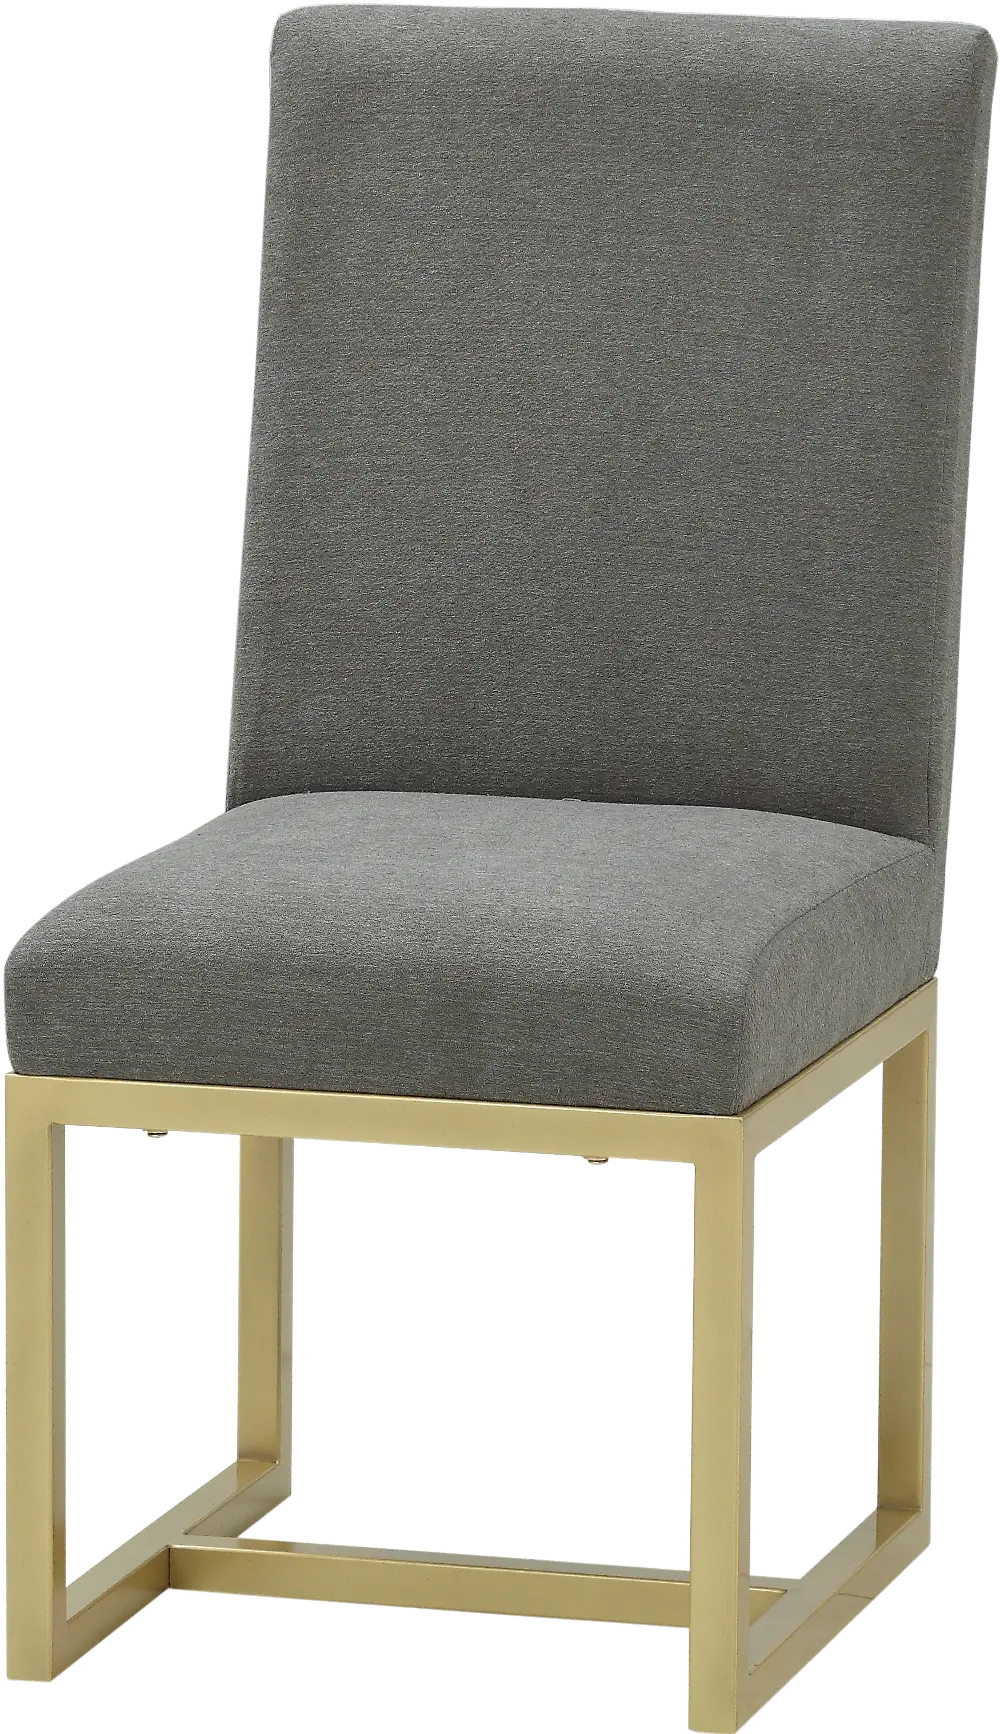 Contemporary Gray and Champagne Upholstered Dining Room Chair - Tango-1